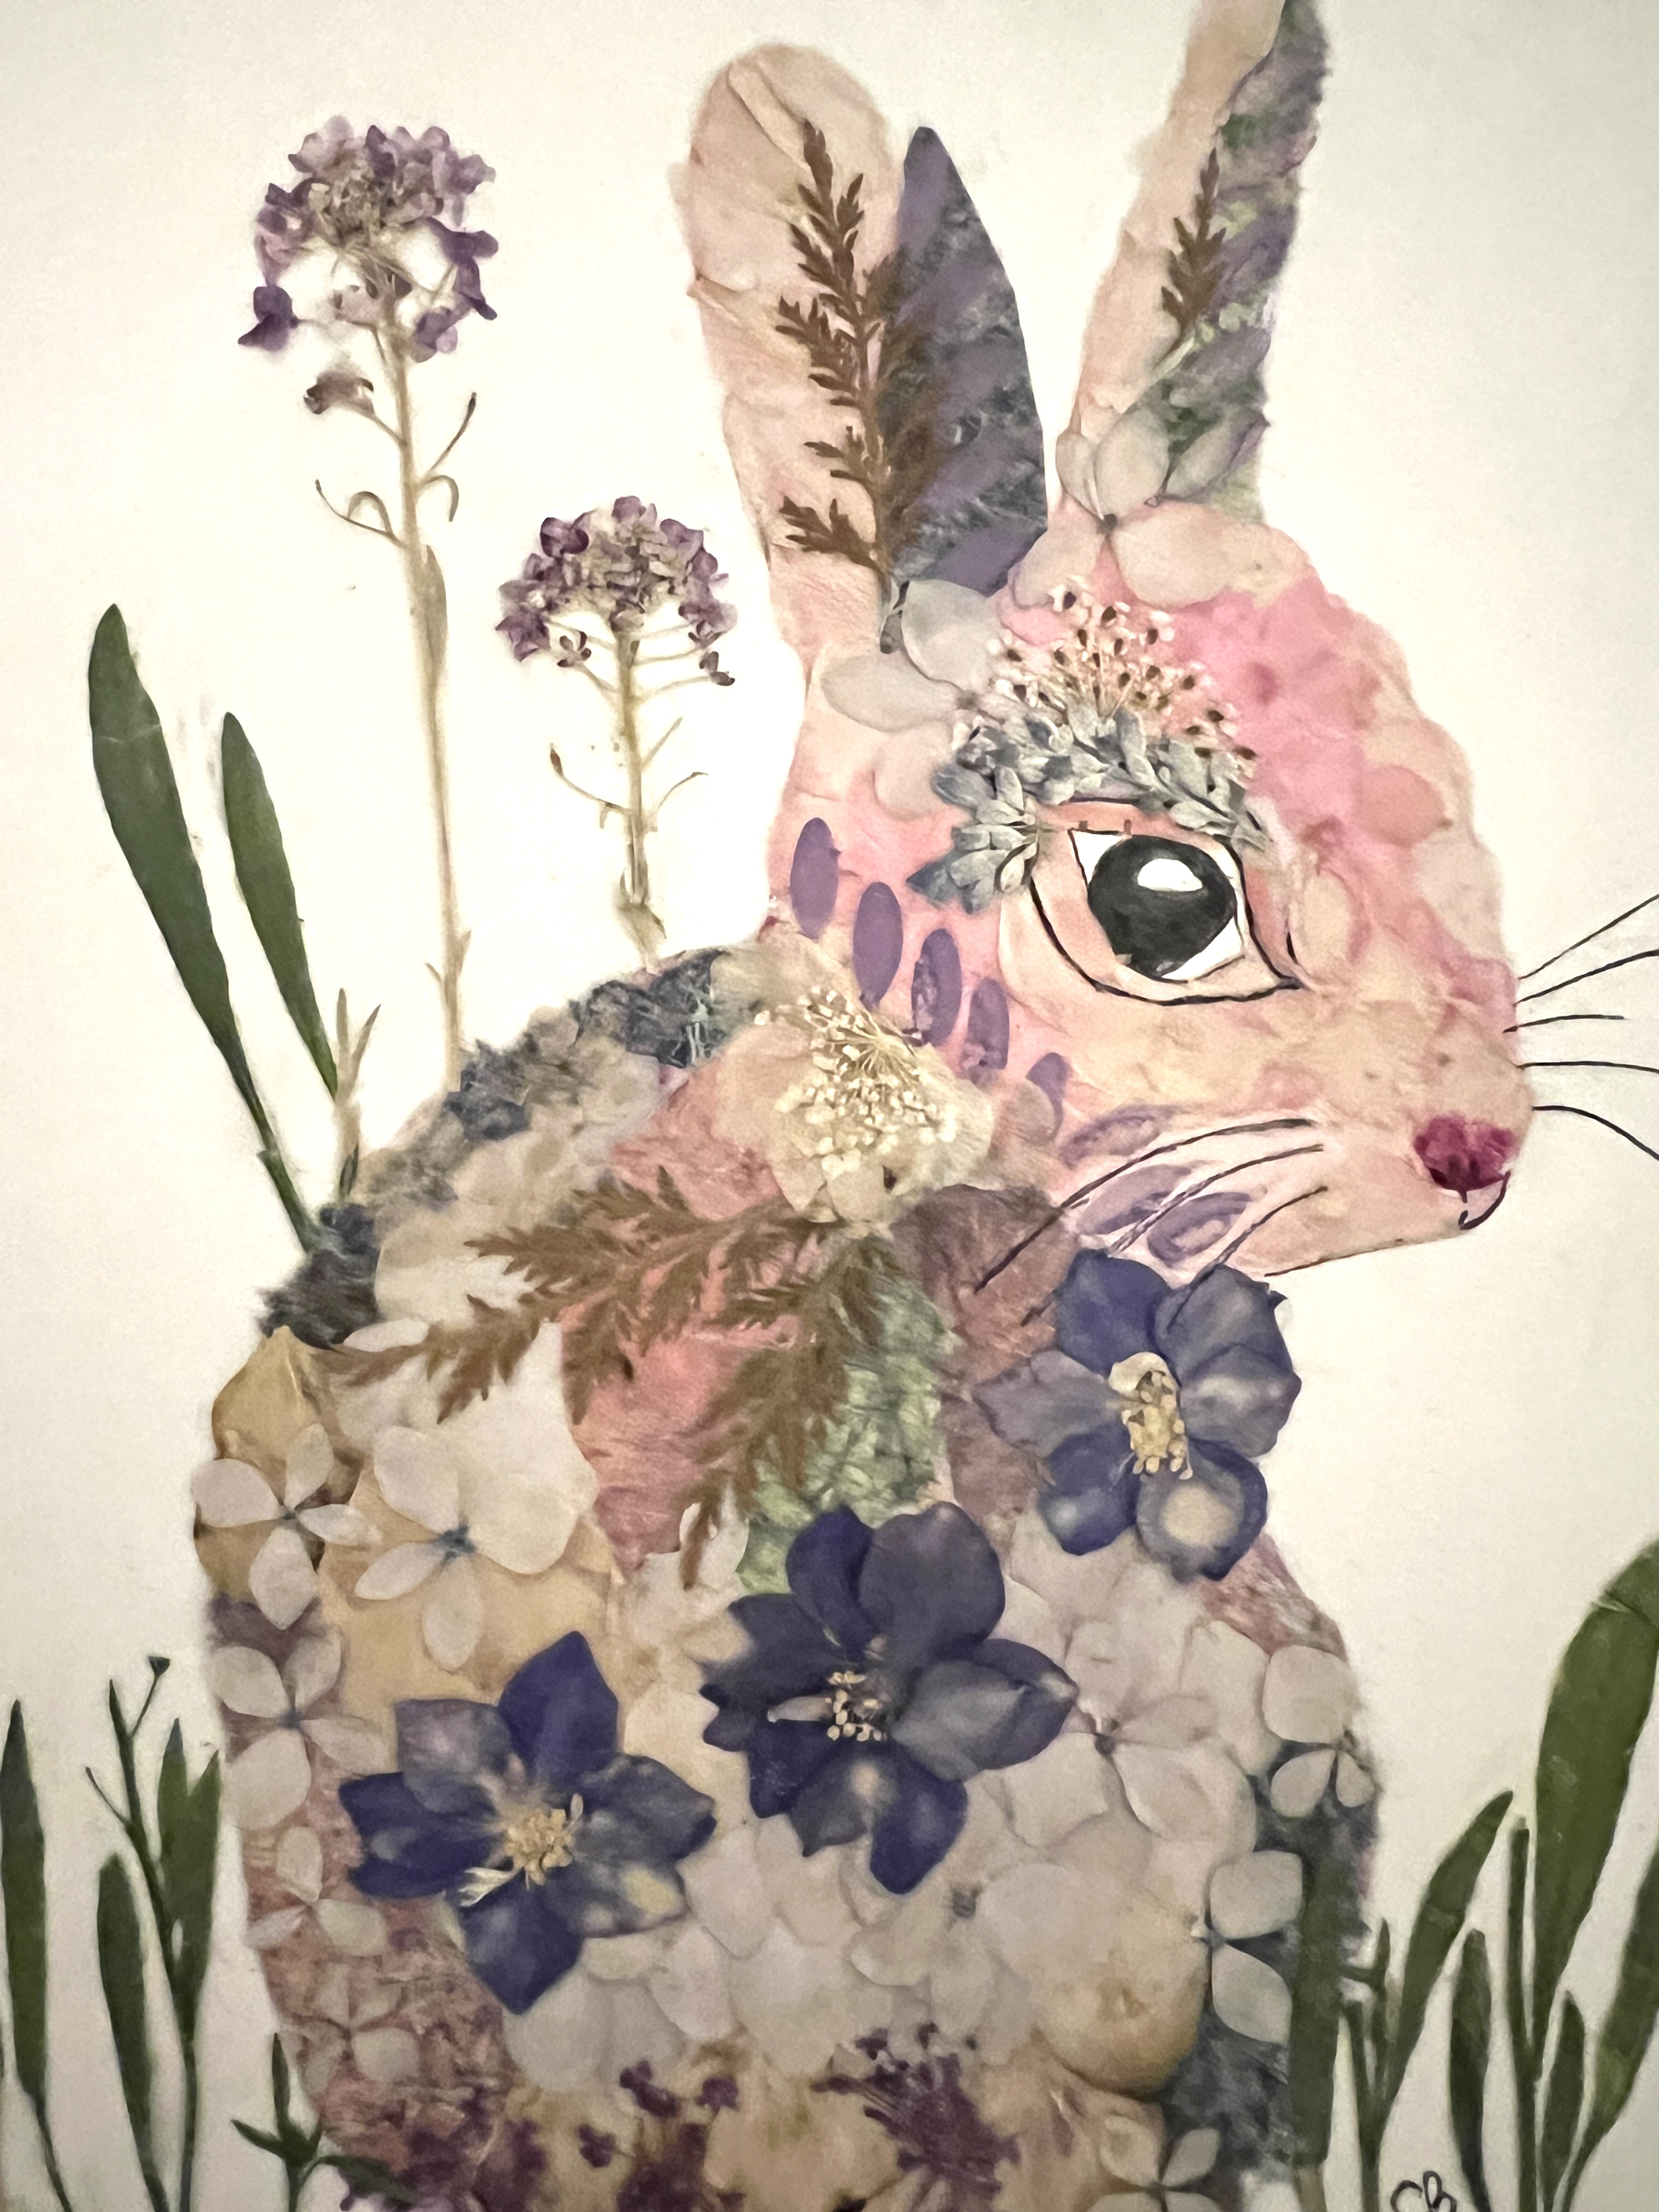 A photo of a bunny made using pink and purple dried flowers.